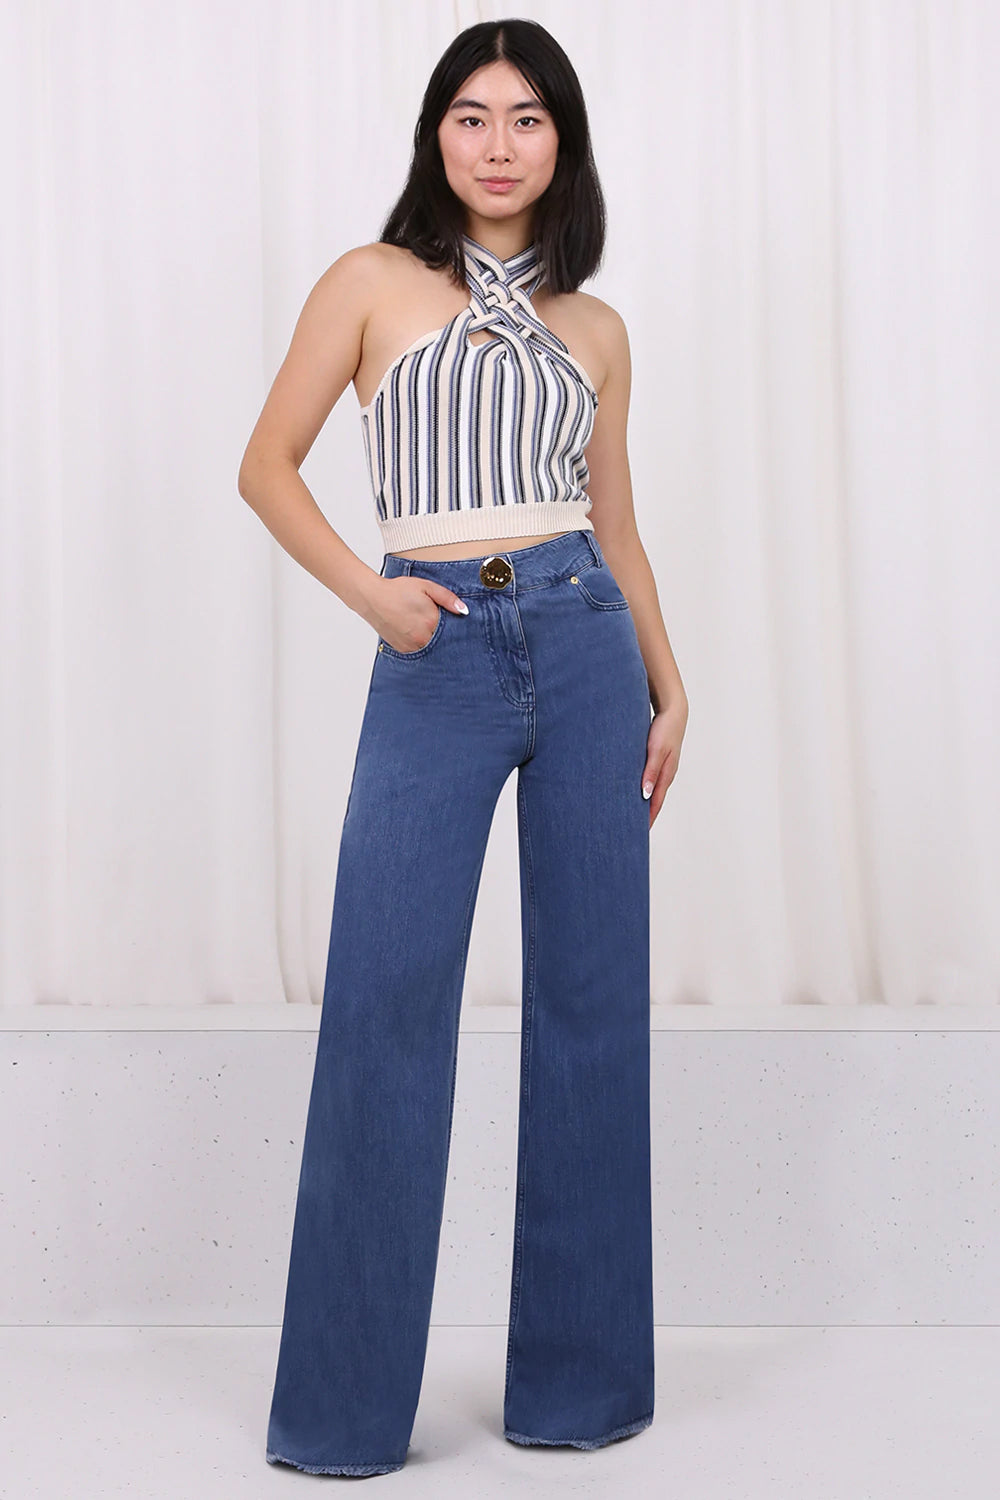 Y/PROJECT TOPS BRAIDED KNIT TOP S/LESS BLUE/CREAM